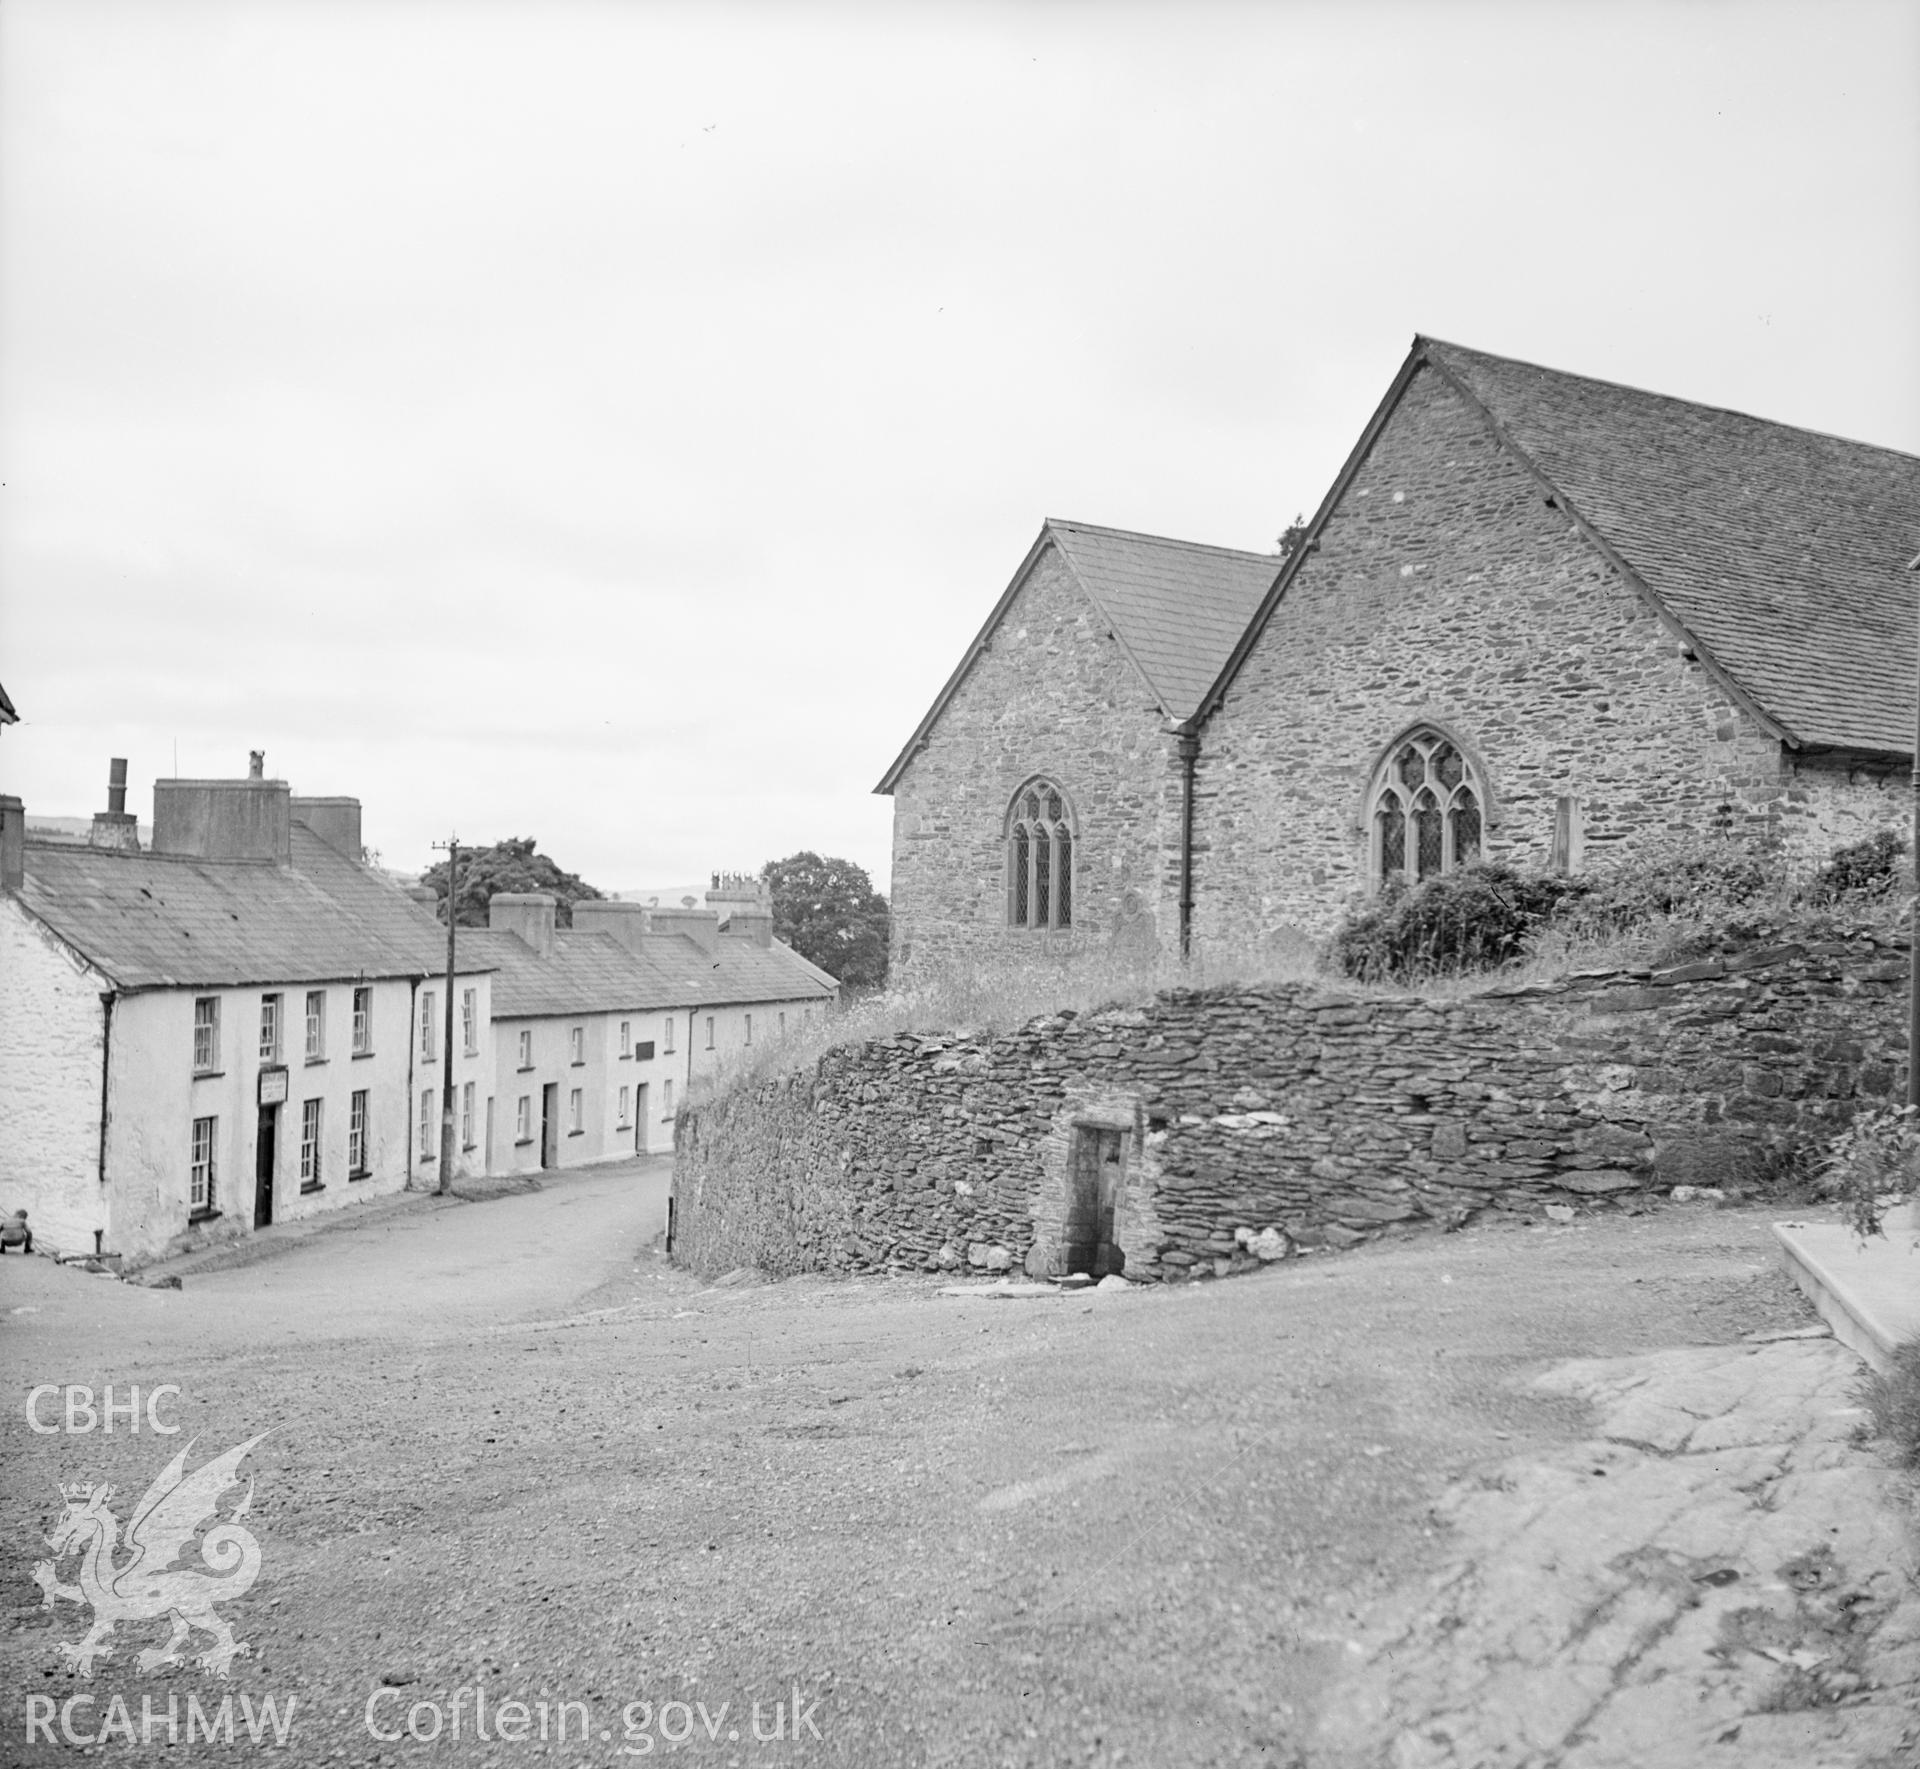 Exterior view of St Teilo's Church, taken by Miss Wight, 1965.